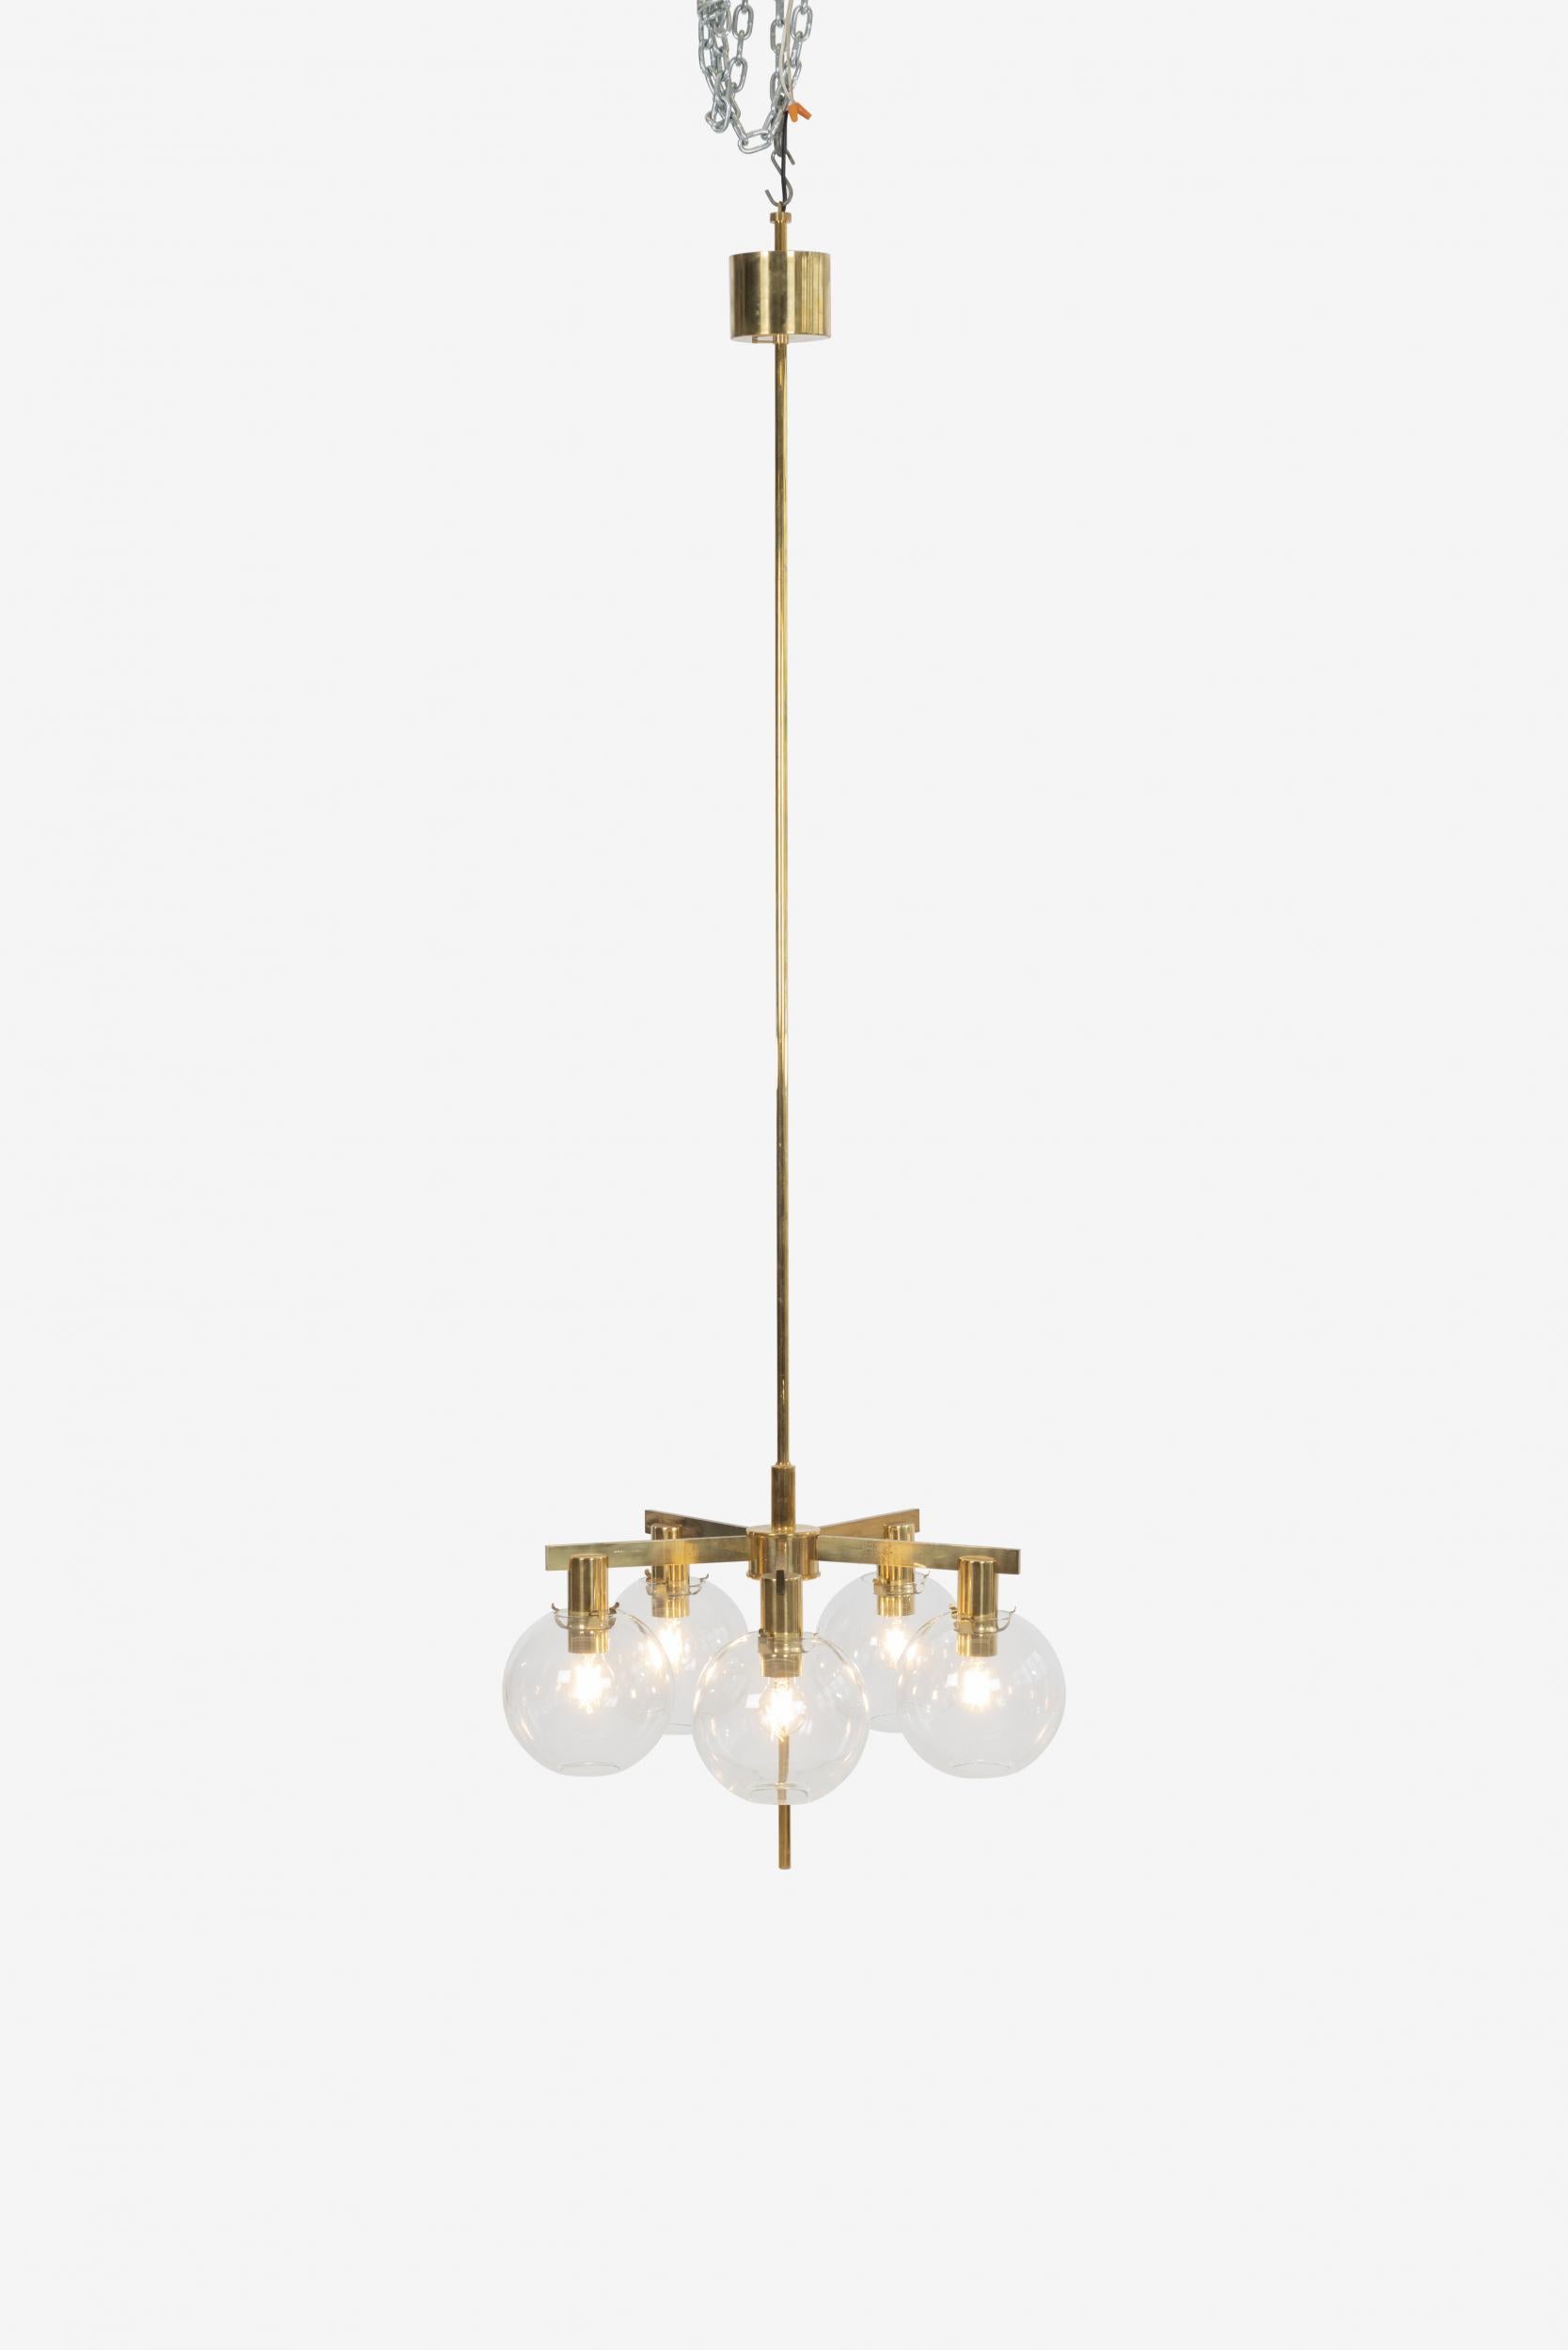 Hans-Agne Jakobsson five globe pastoral chandelier, model T 384/5 
Brass and glass by Hans-Agne Jakobsson AB Sweden, 1965
(Lamp stem can be shortened at desired length for no extra charge).